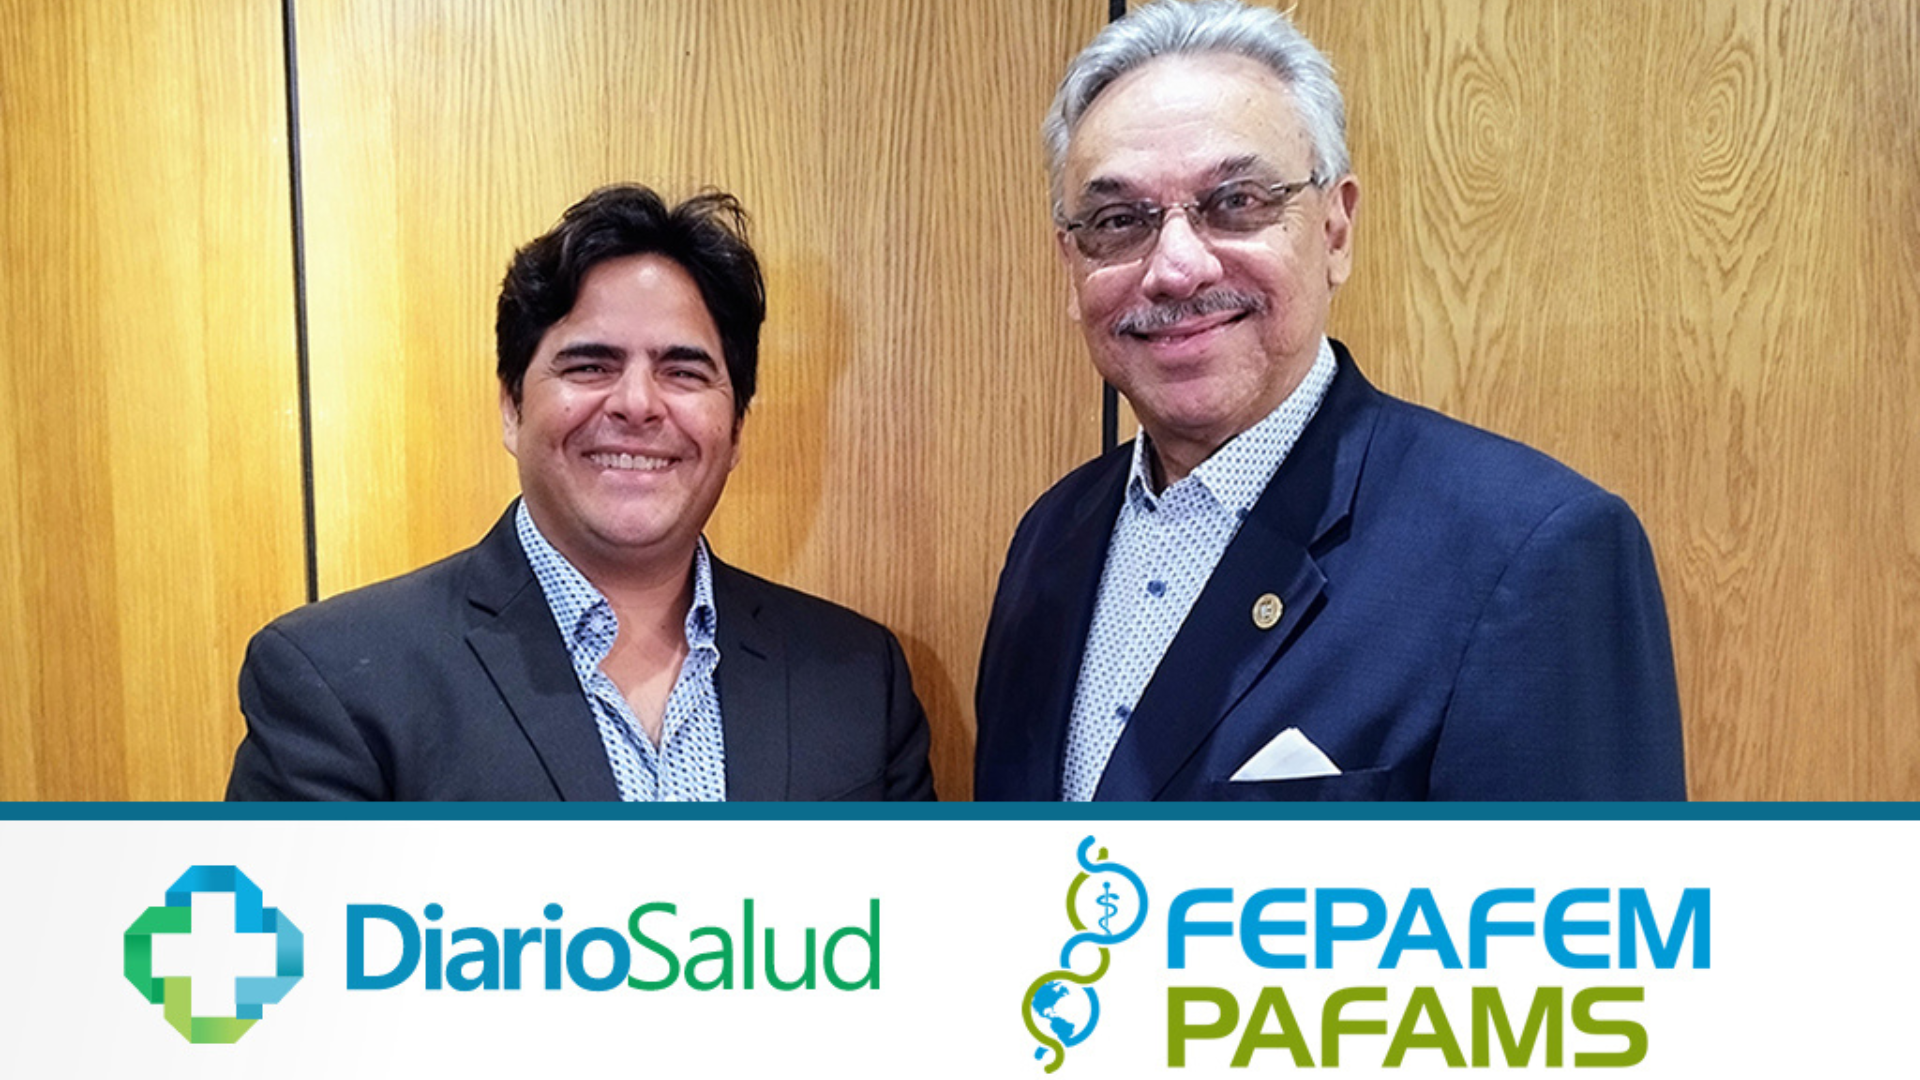 Pan-American Federation of Associations of Medical Schools PAFAMS and DiarioSalud sign an agreement - #BHHMembersInitiatives